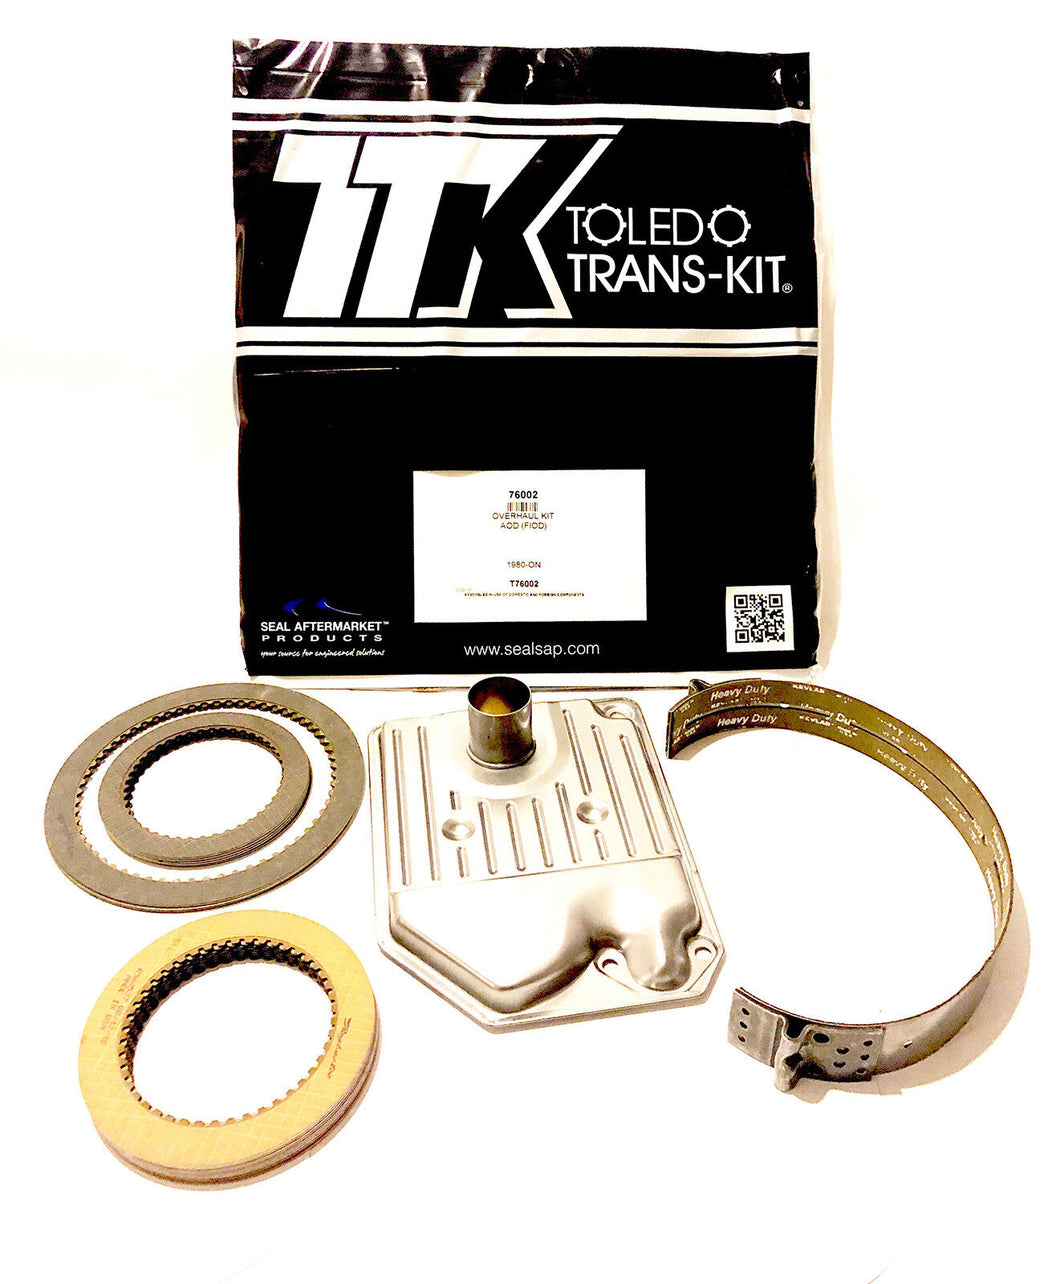 AOD Transmission Rebuild Kit 1980-1993 with Filter 4 WD Clutches Band